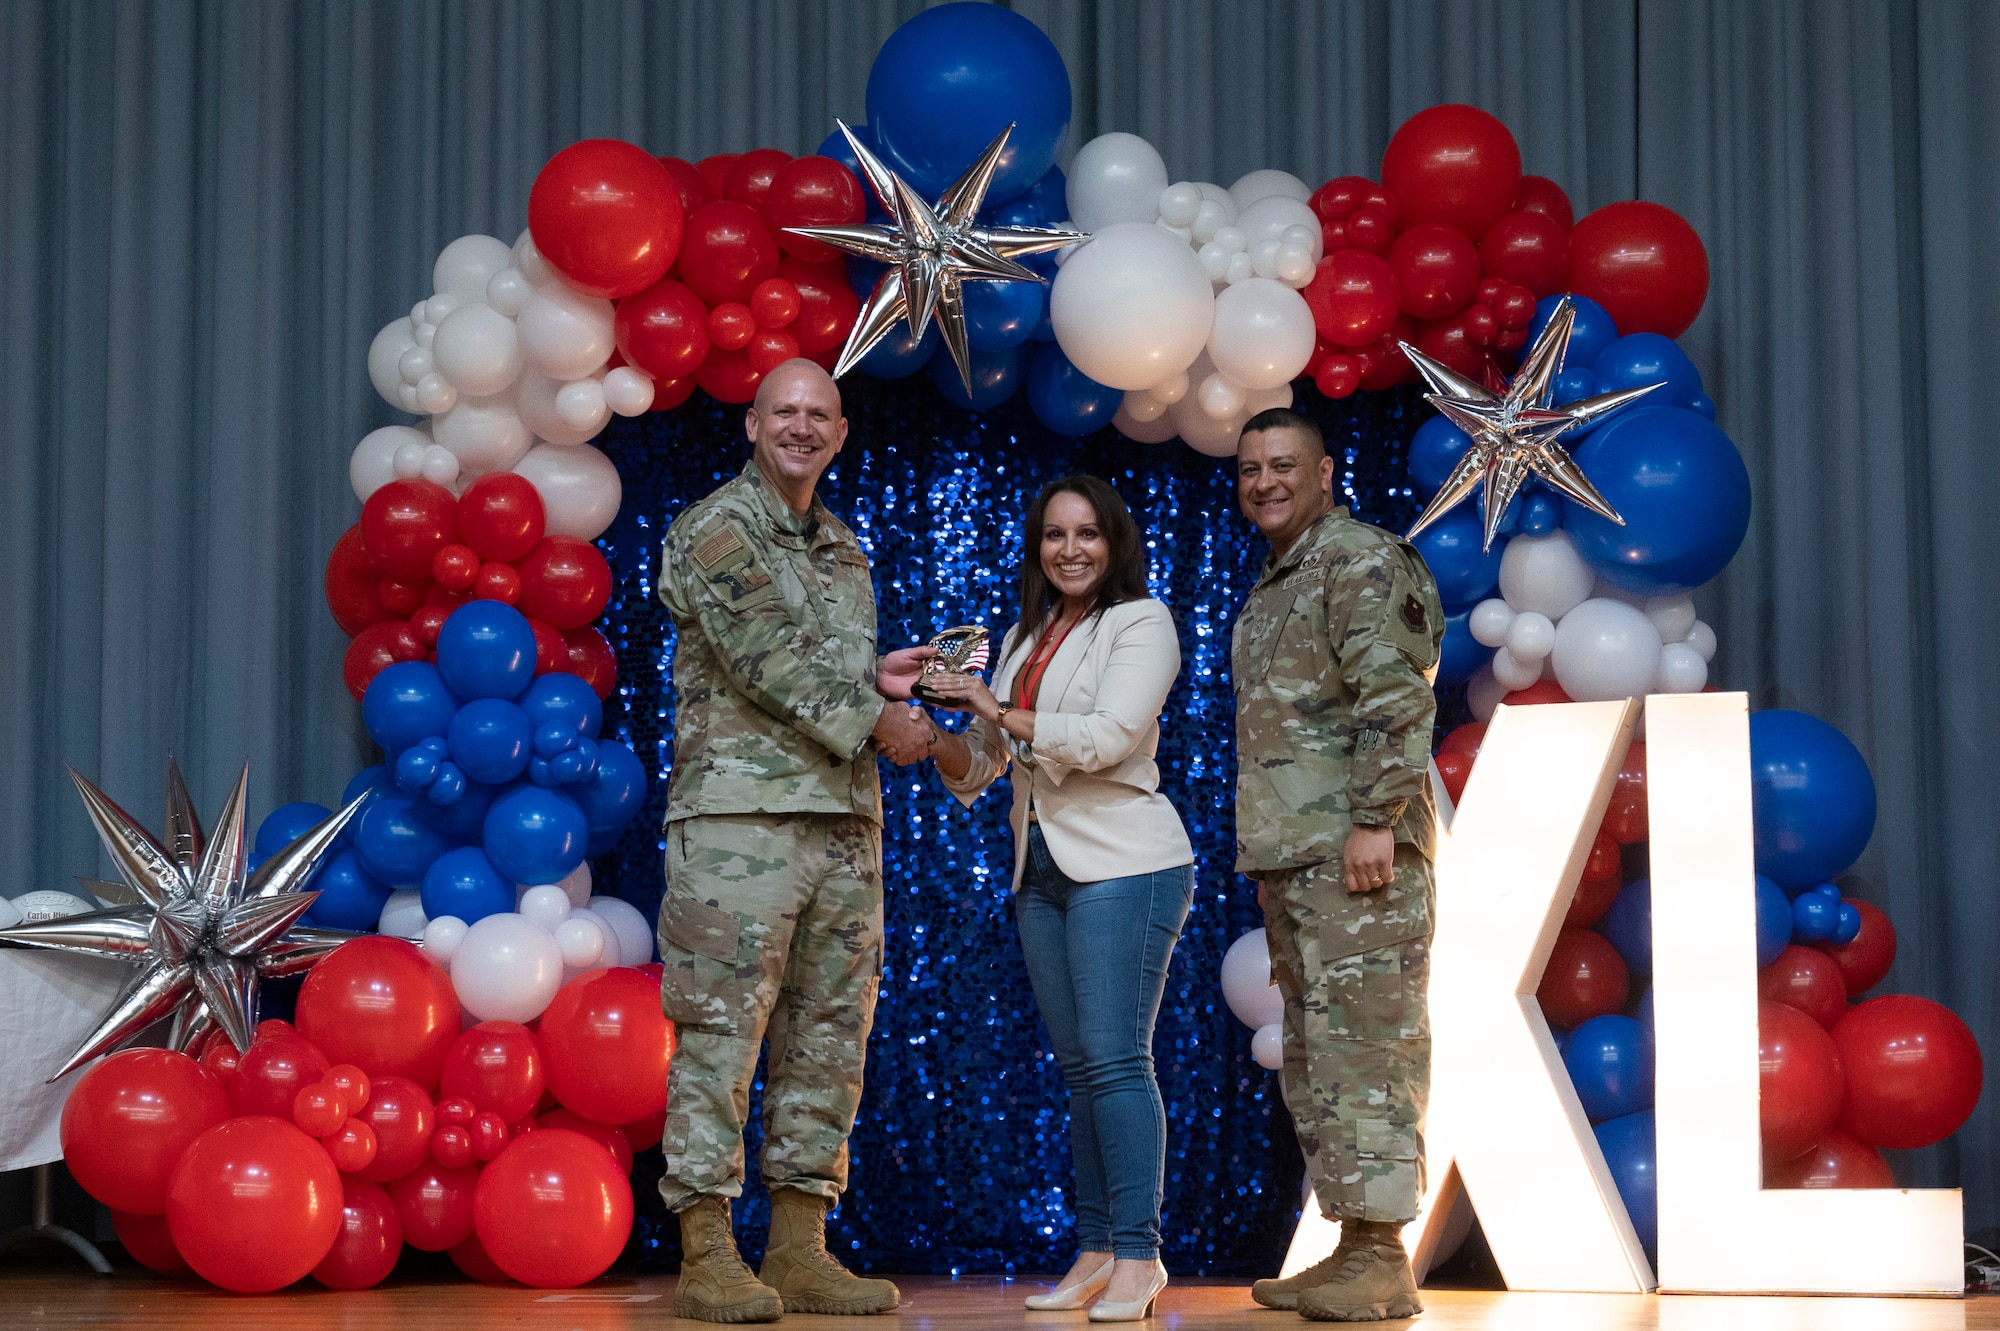 U.S. Air Force Col. Kevin Davidson, 47th Flying Training Wing (FTW) commander, and Chief Master Sgt. Lester Largaespada, 47th FTW command chief, present Karla Hernandez, 47th Mission Support Group, an award during the 2023 47th FTW Annual Awards Ceremony at Laughlin Air Force Base, Texas, Feb. 2, 2024. Annual award winners were selected based on their technical expertise, demonstration of leadership and job performance. (U.S. Air Force photo by Senior Airman Kailee Reynolds)